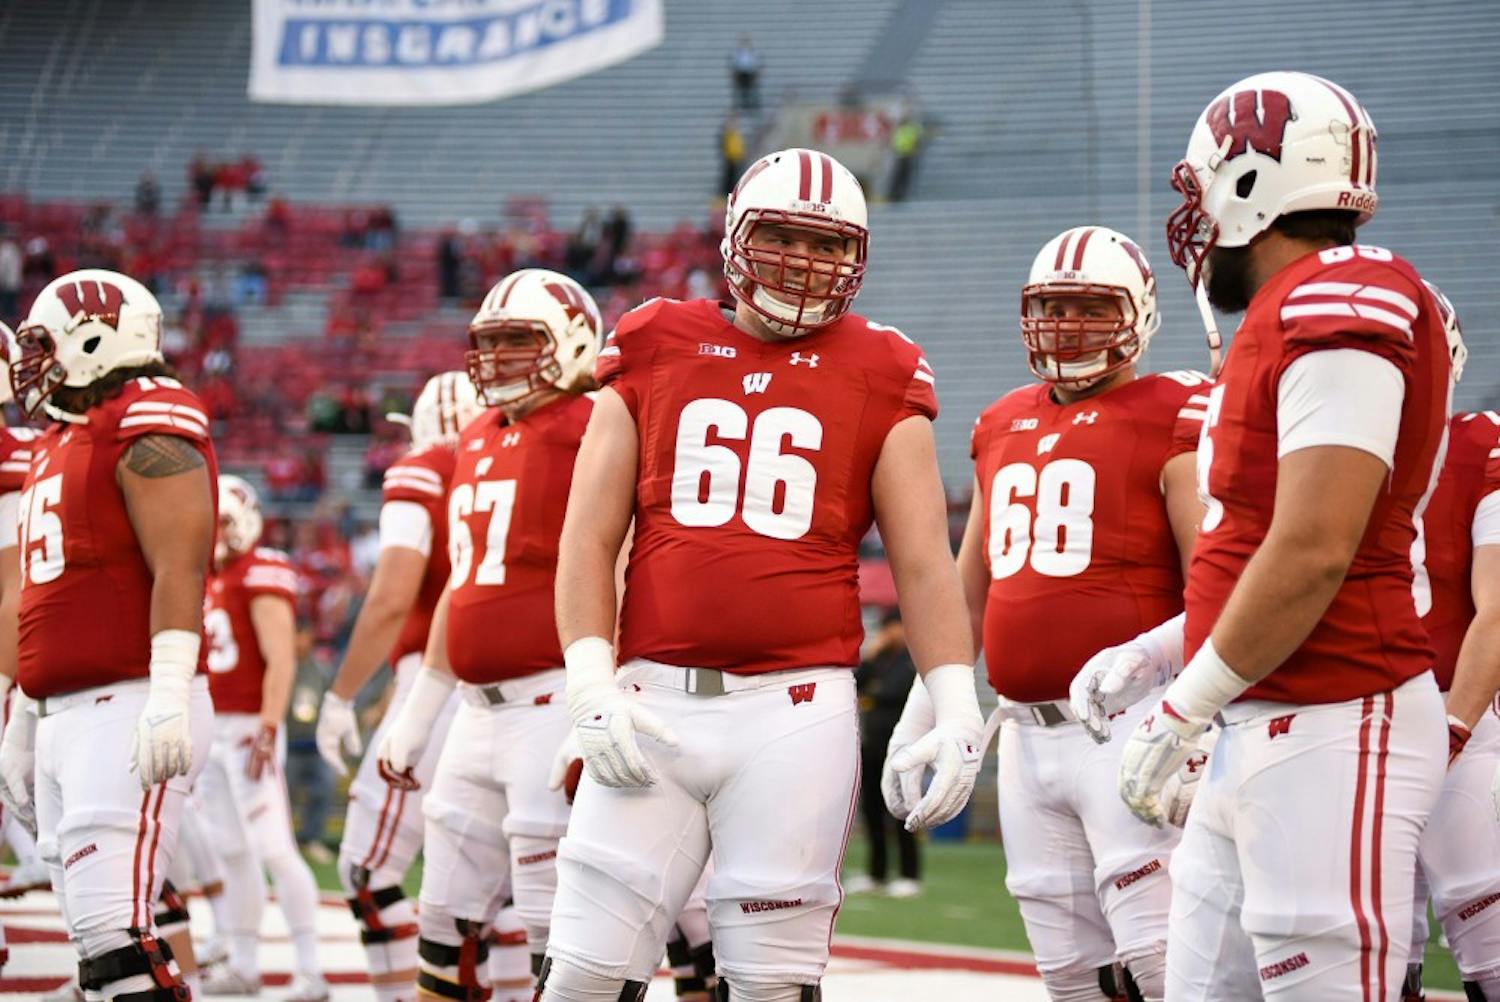 The offensive line must improve their play for Wisconsin to keep having success.&nbsp;